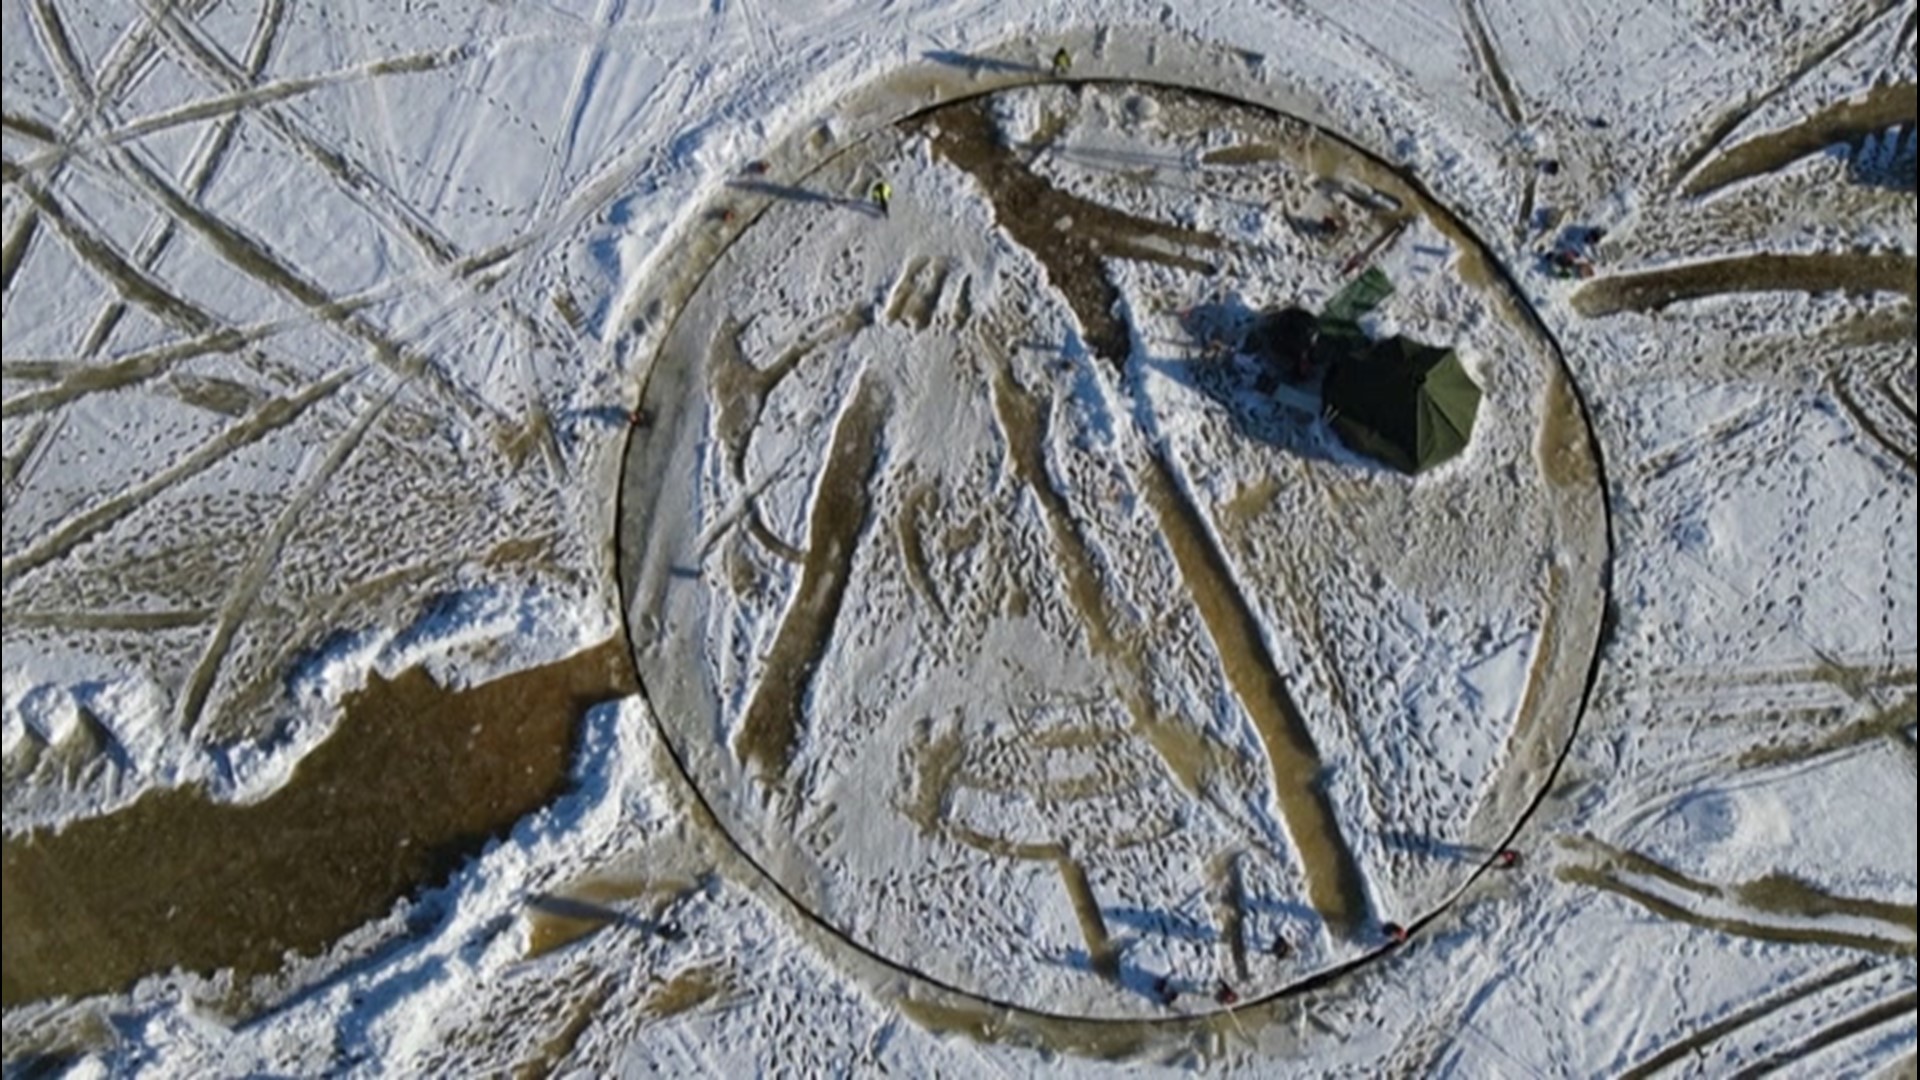 Inventor Janne Kapylehto and a crew of workers have cut a 300-meter circle into a frozen lake, with a smaller circle cut into the center and boat motors attached to make the massive ice disc spin.